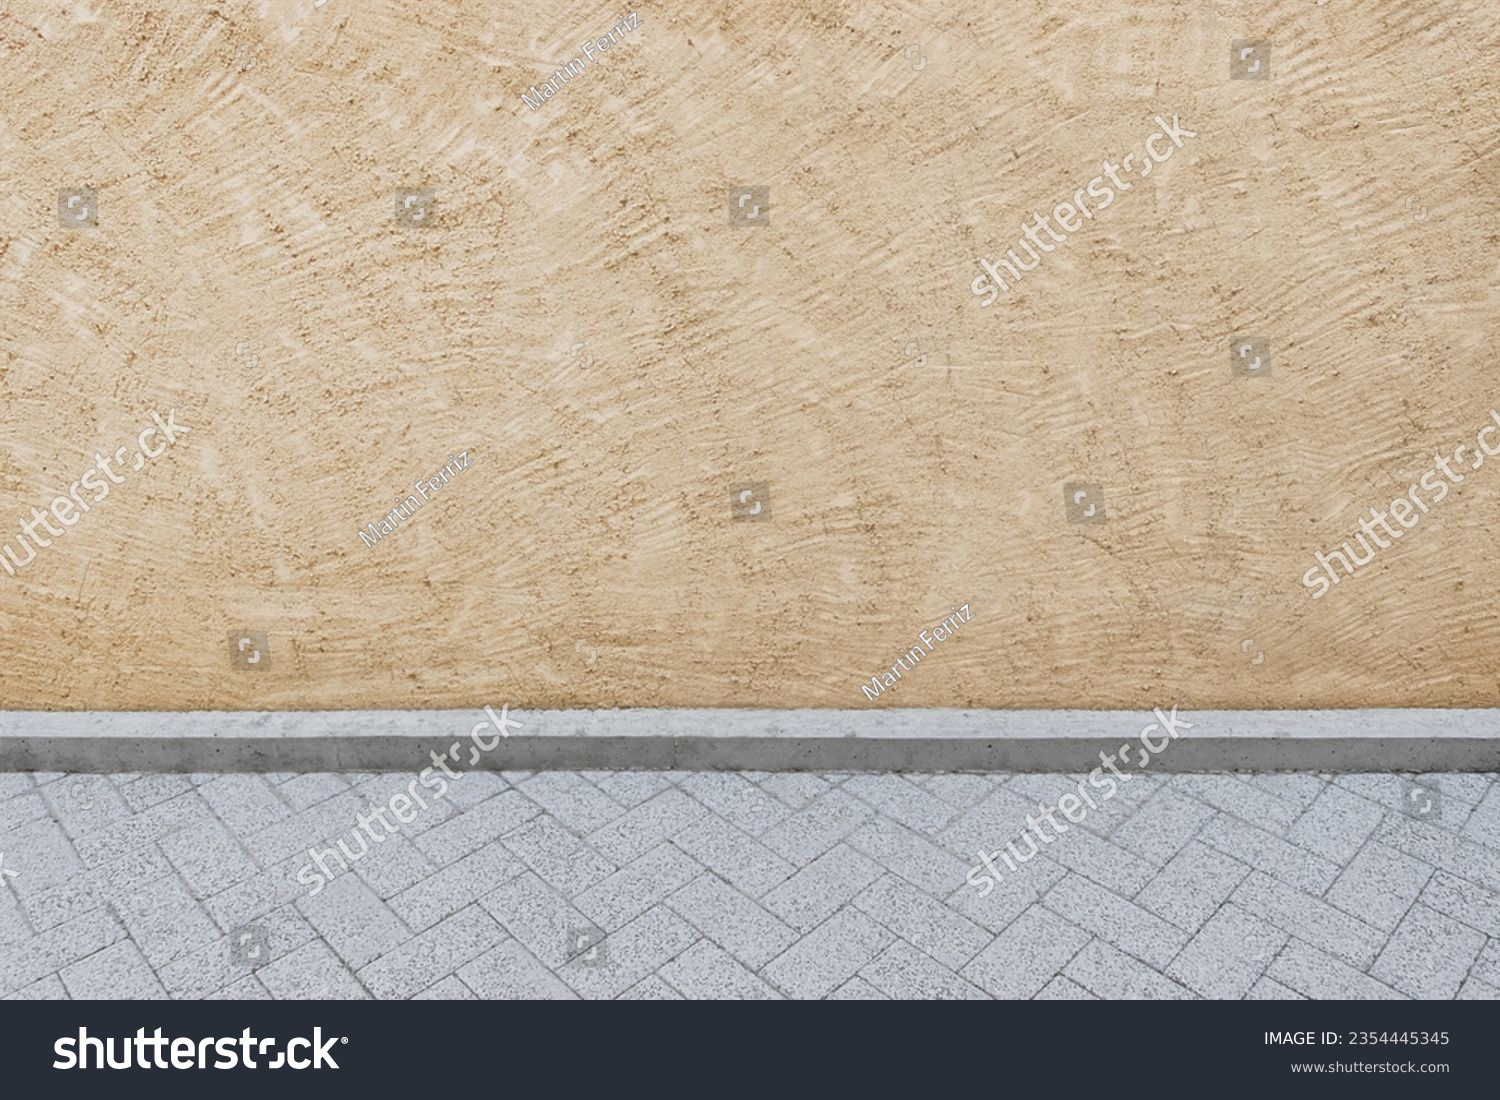 Textured background of a light beige or cream painted concrete wall on a street with a view of part of the road #2354445345